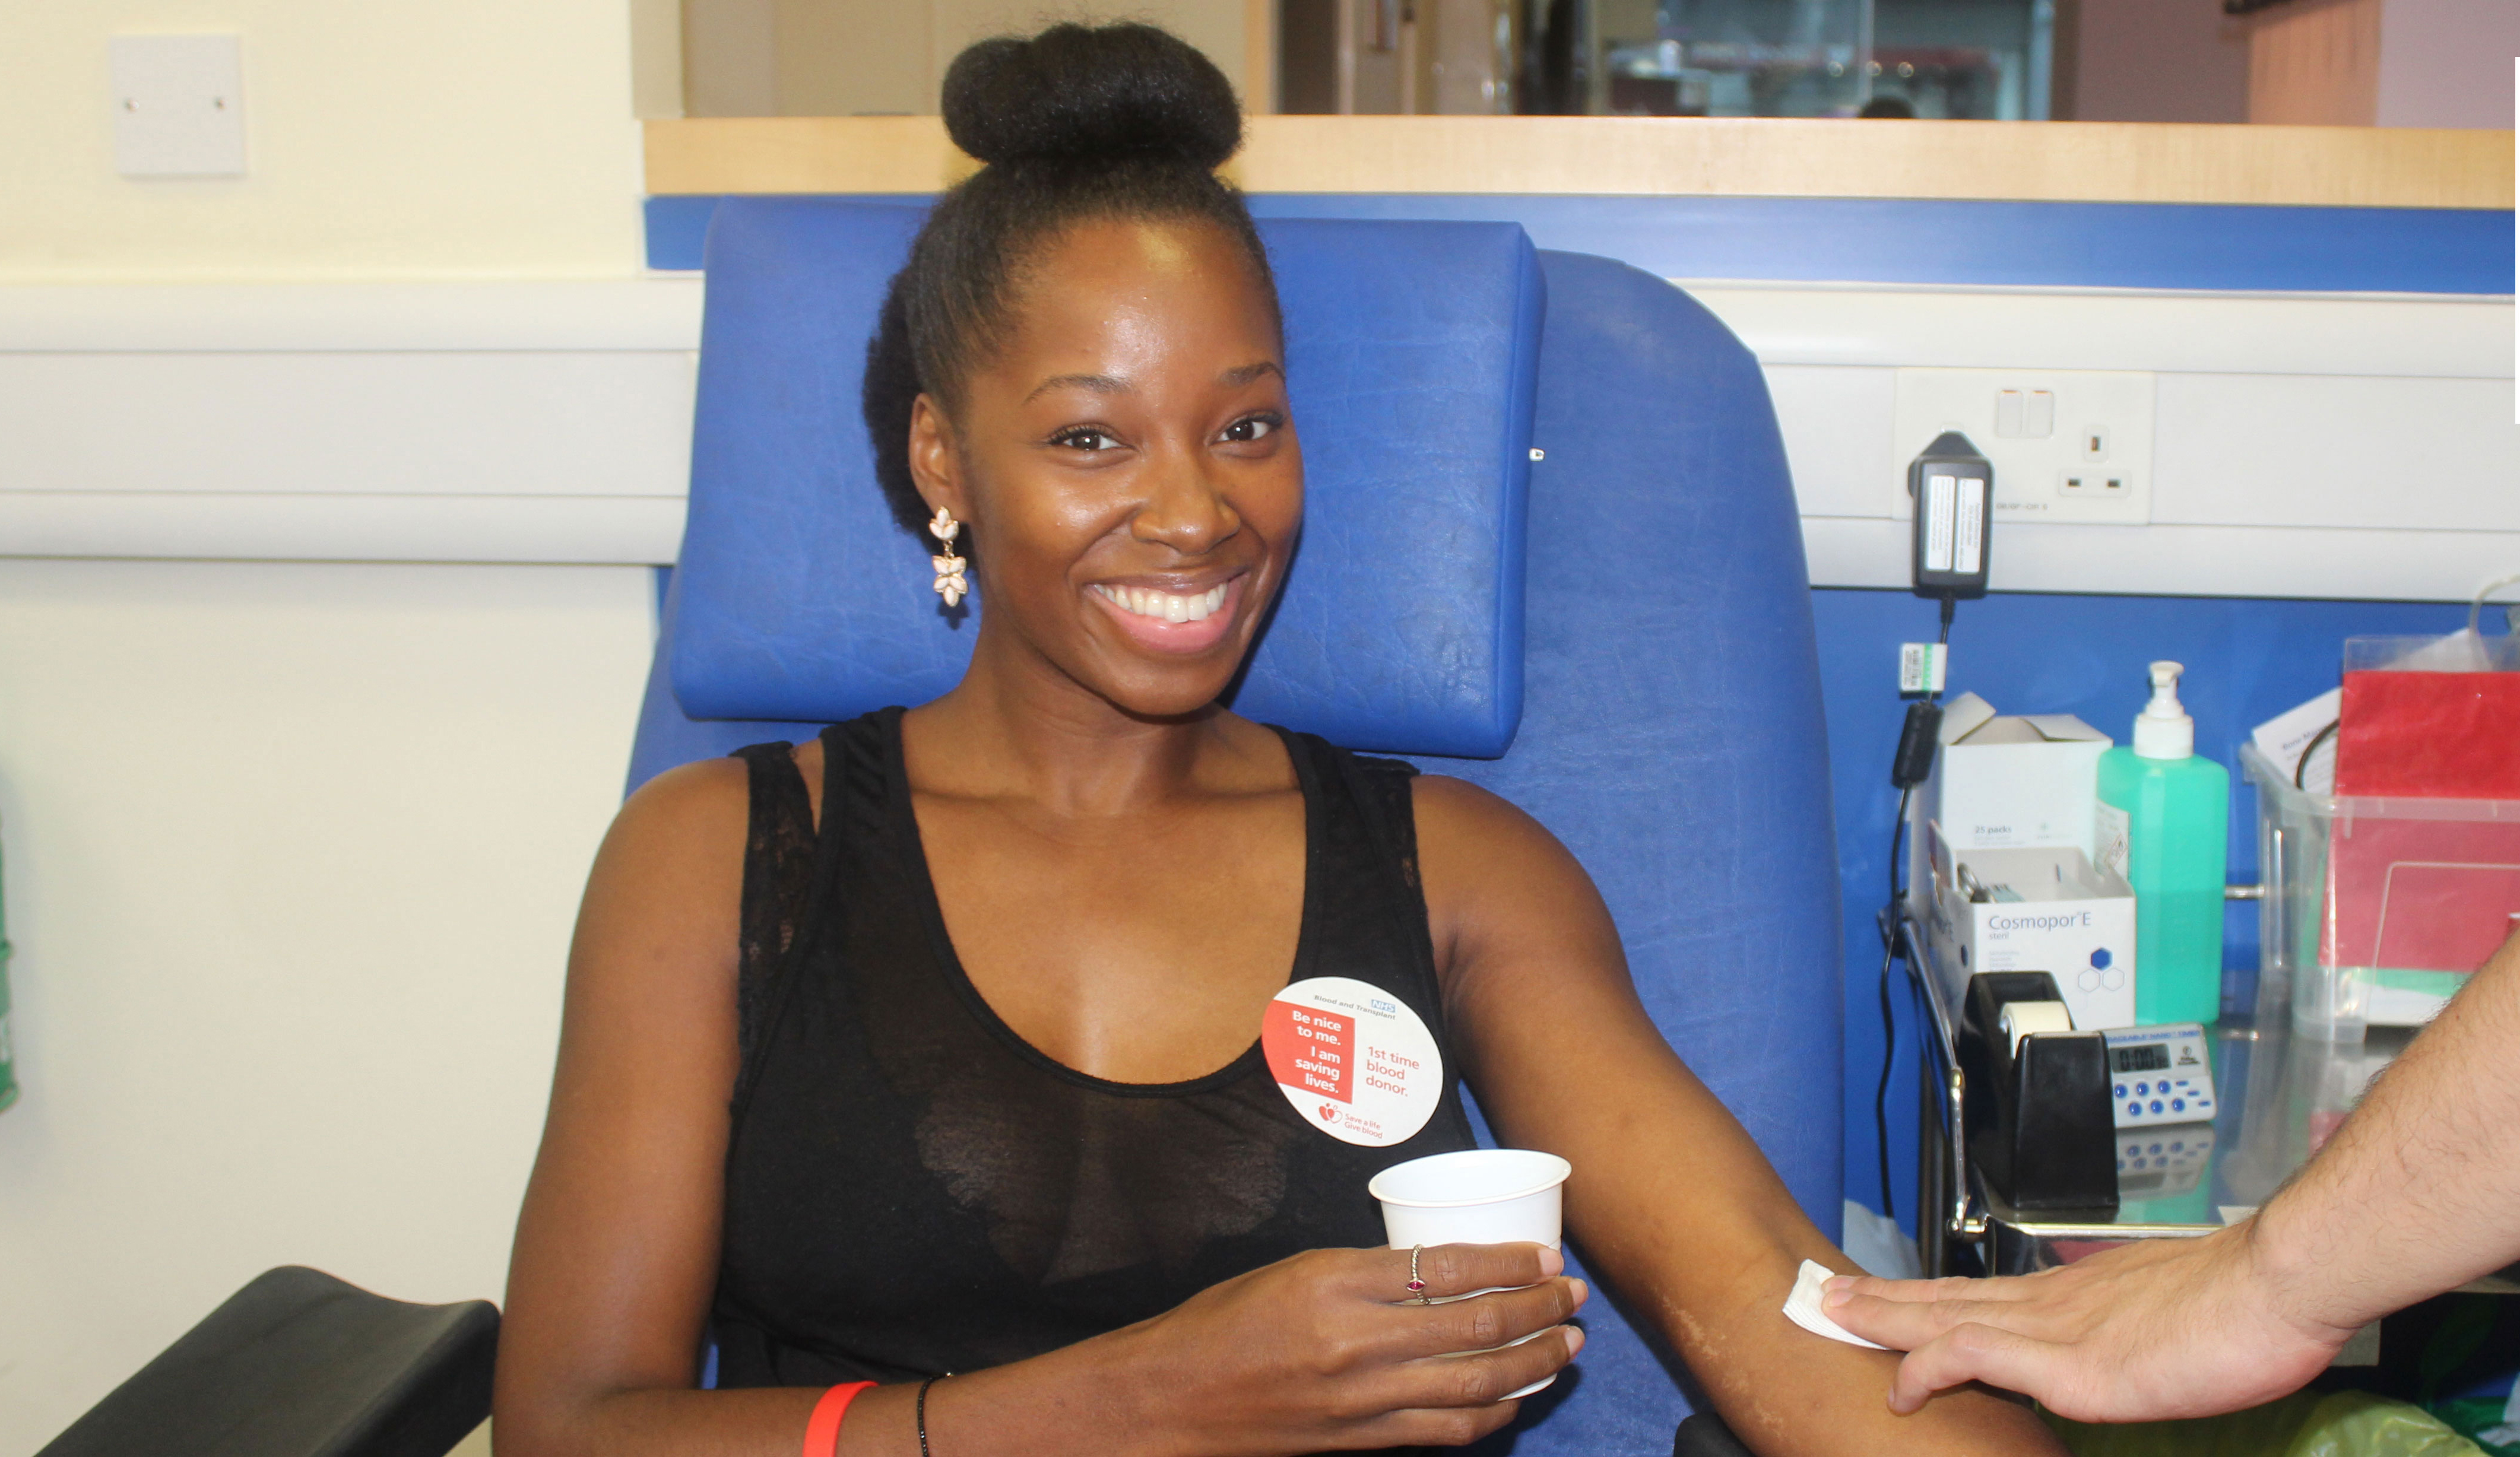 Birmingham musician and TV star Jamelia joining the blood donation and bone marrow donor register with the African Caribbean Leukaemia Trust, amid a shortage of donations from members of ethnic minority communities